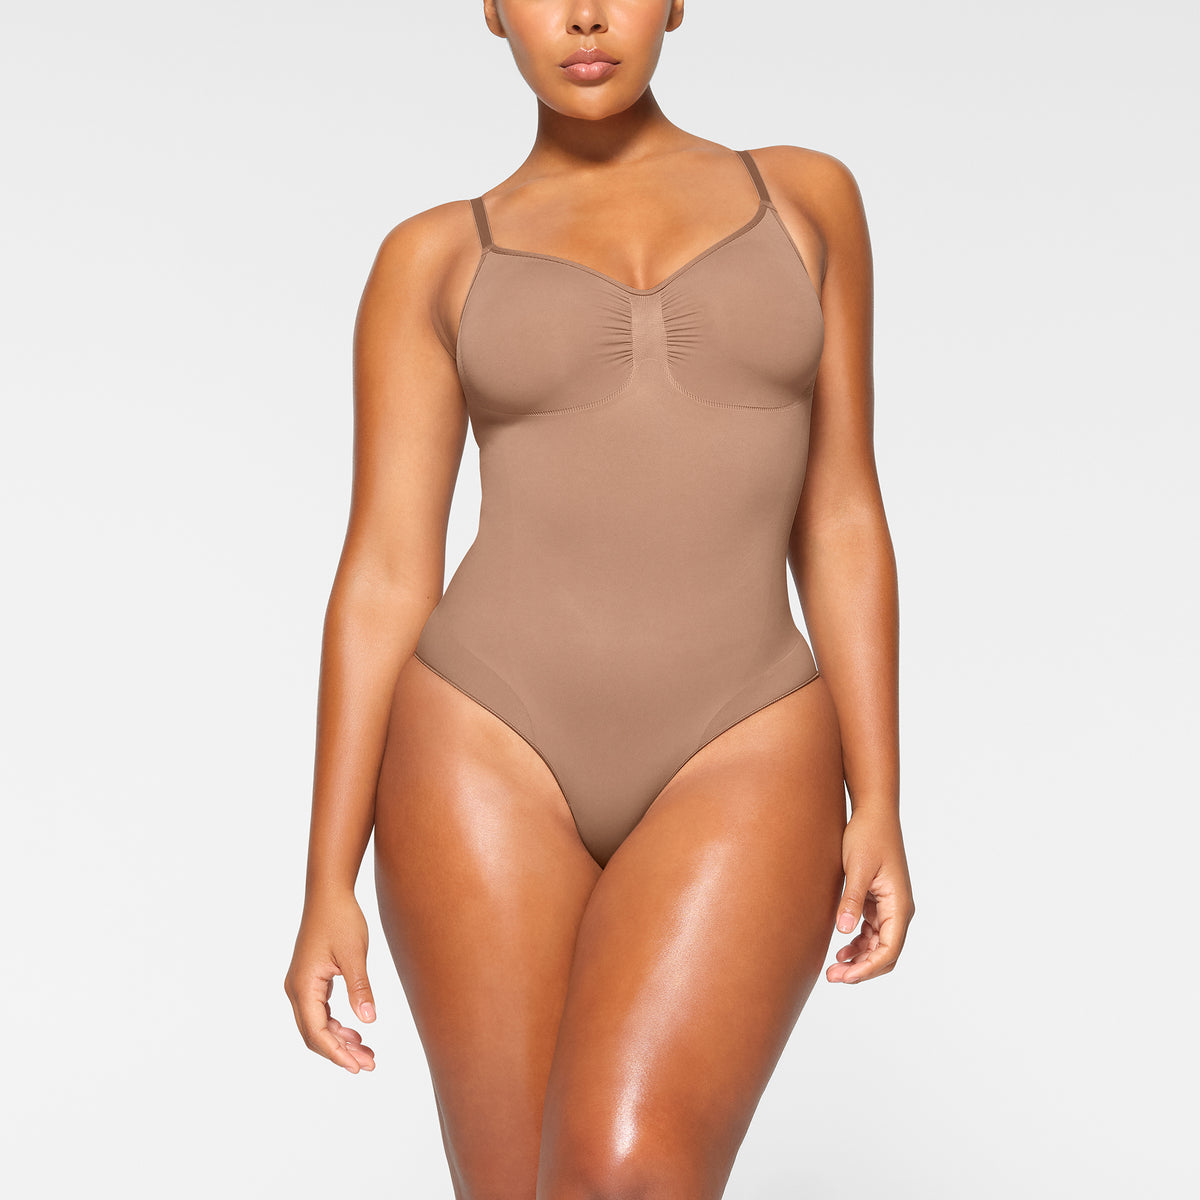 Best Shapewear: Top 5 Brands Most Recommended By Fashion Experts